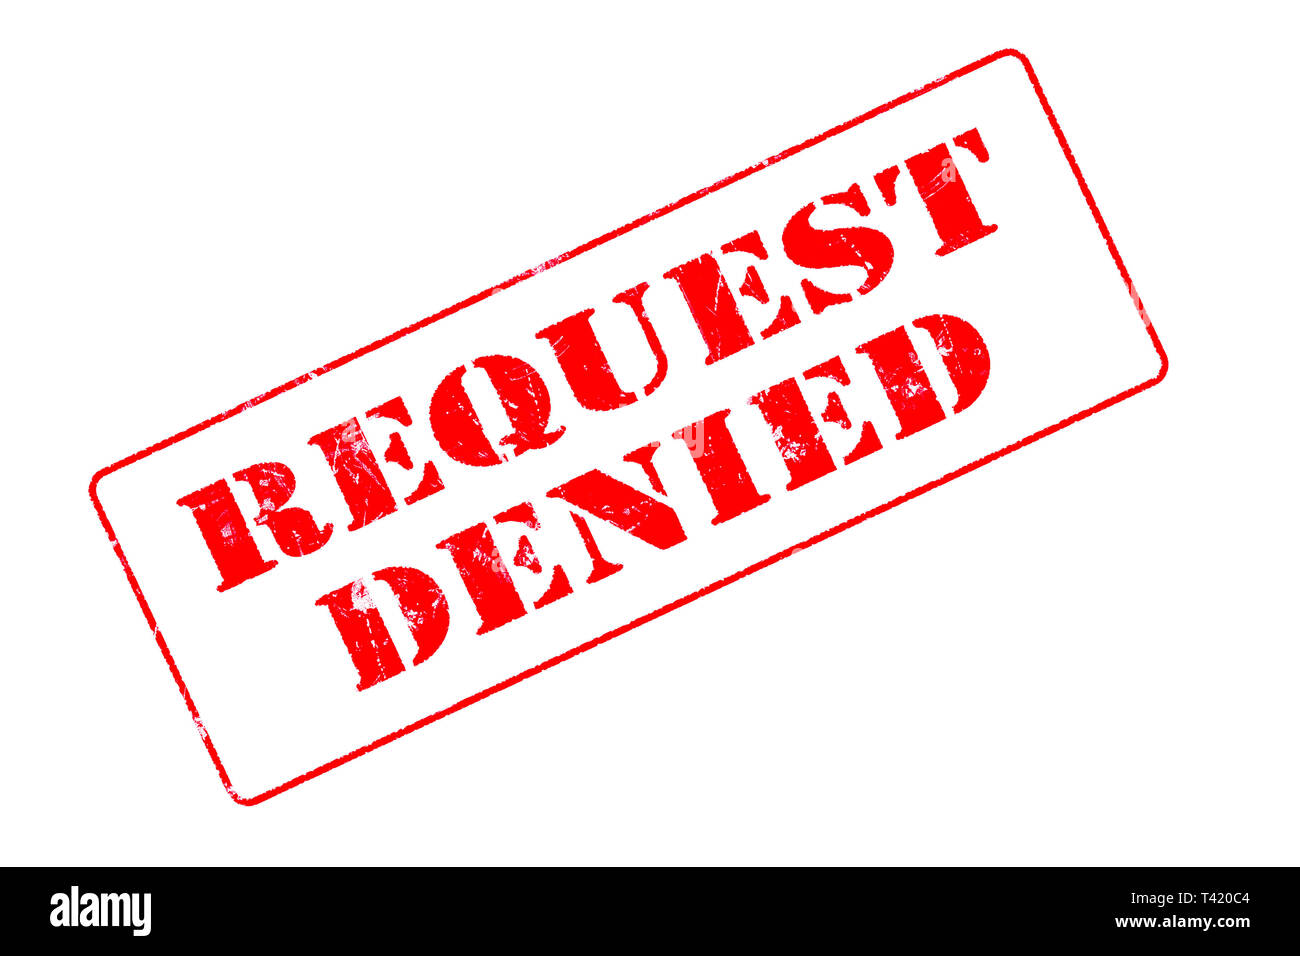 Rubber stamp concept showing a red stamp reading Request Denied Stock Photo